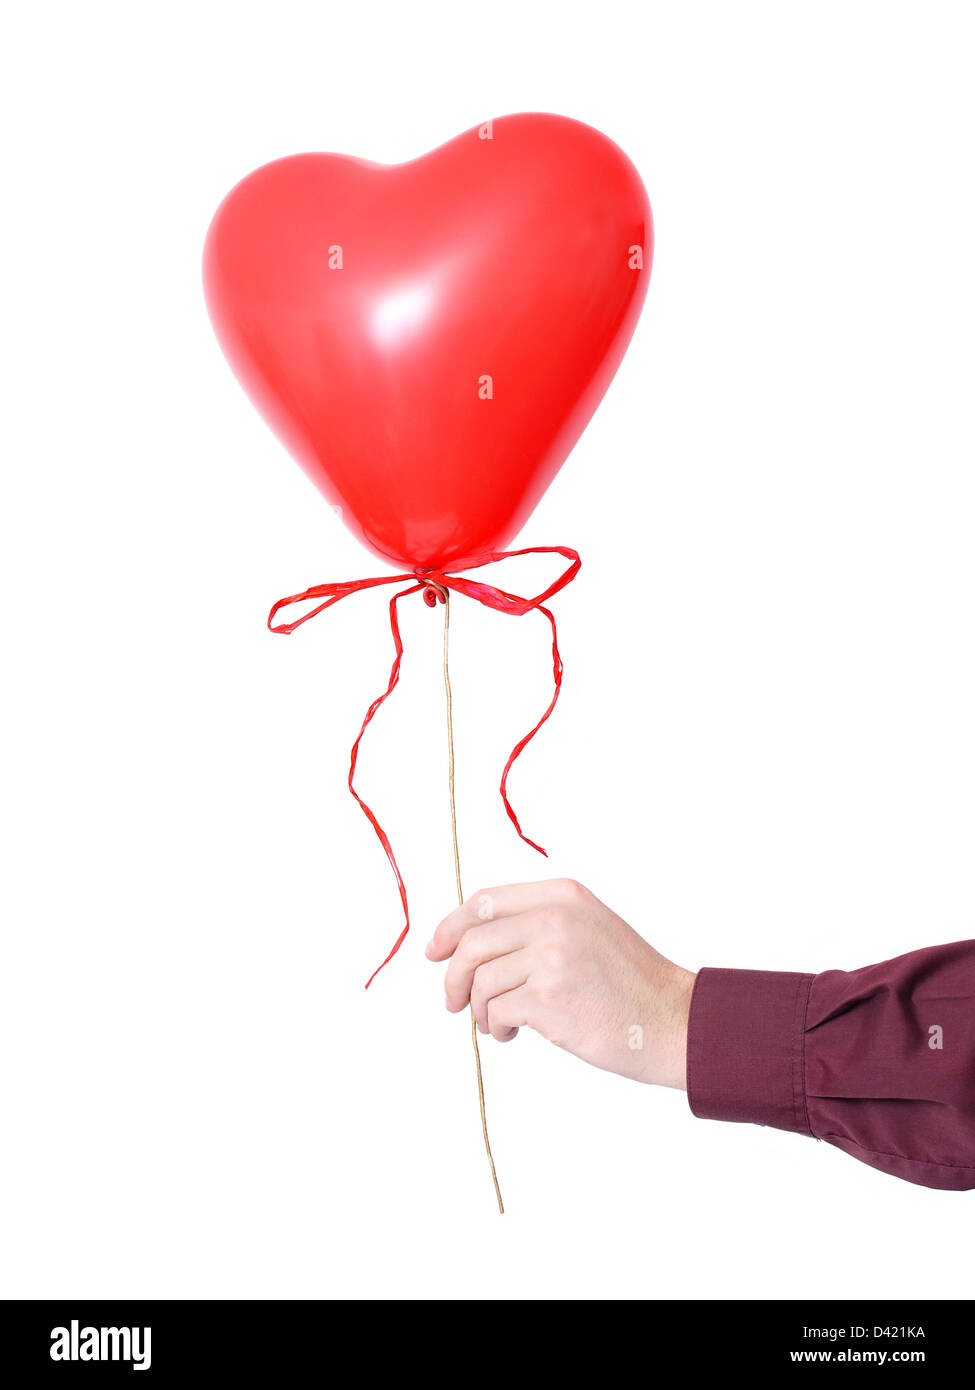 Homme hand holding red heart-shaped balloon avec cocarde tricolore sur fond blanc Banque D'Images